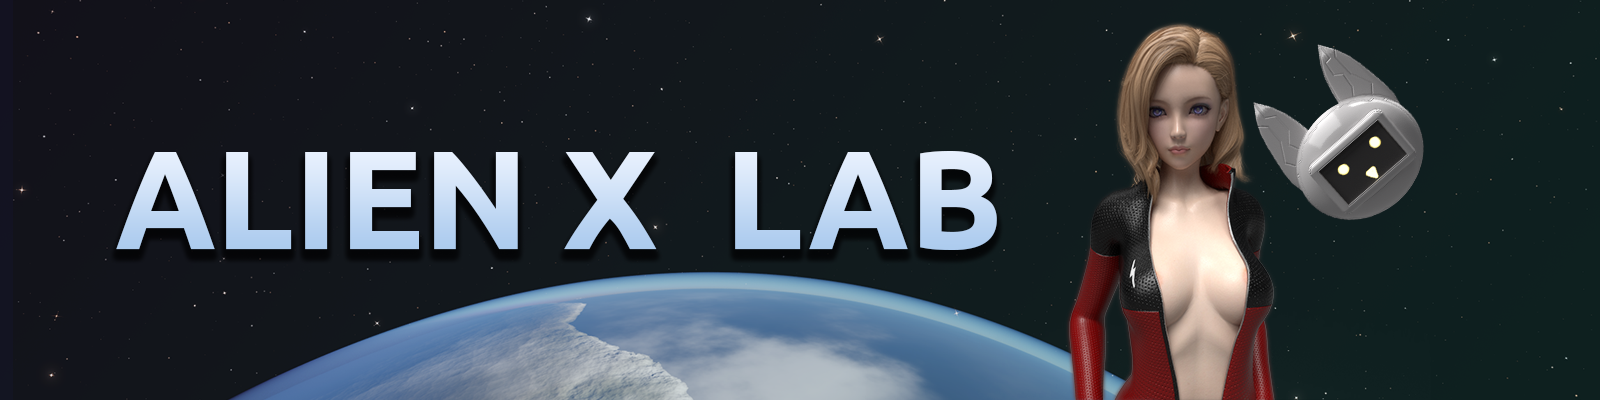 Cover Image for AlienXLab - New Version Available!